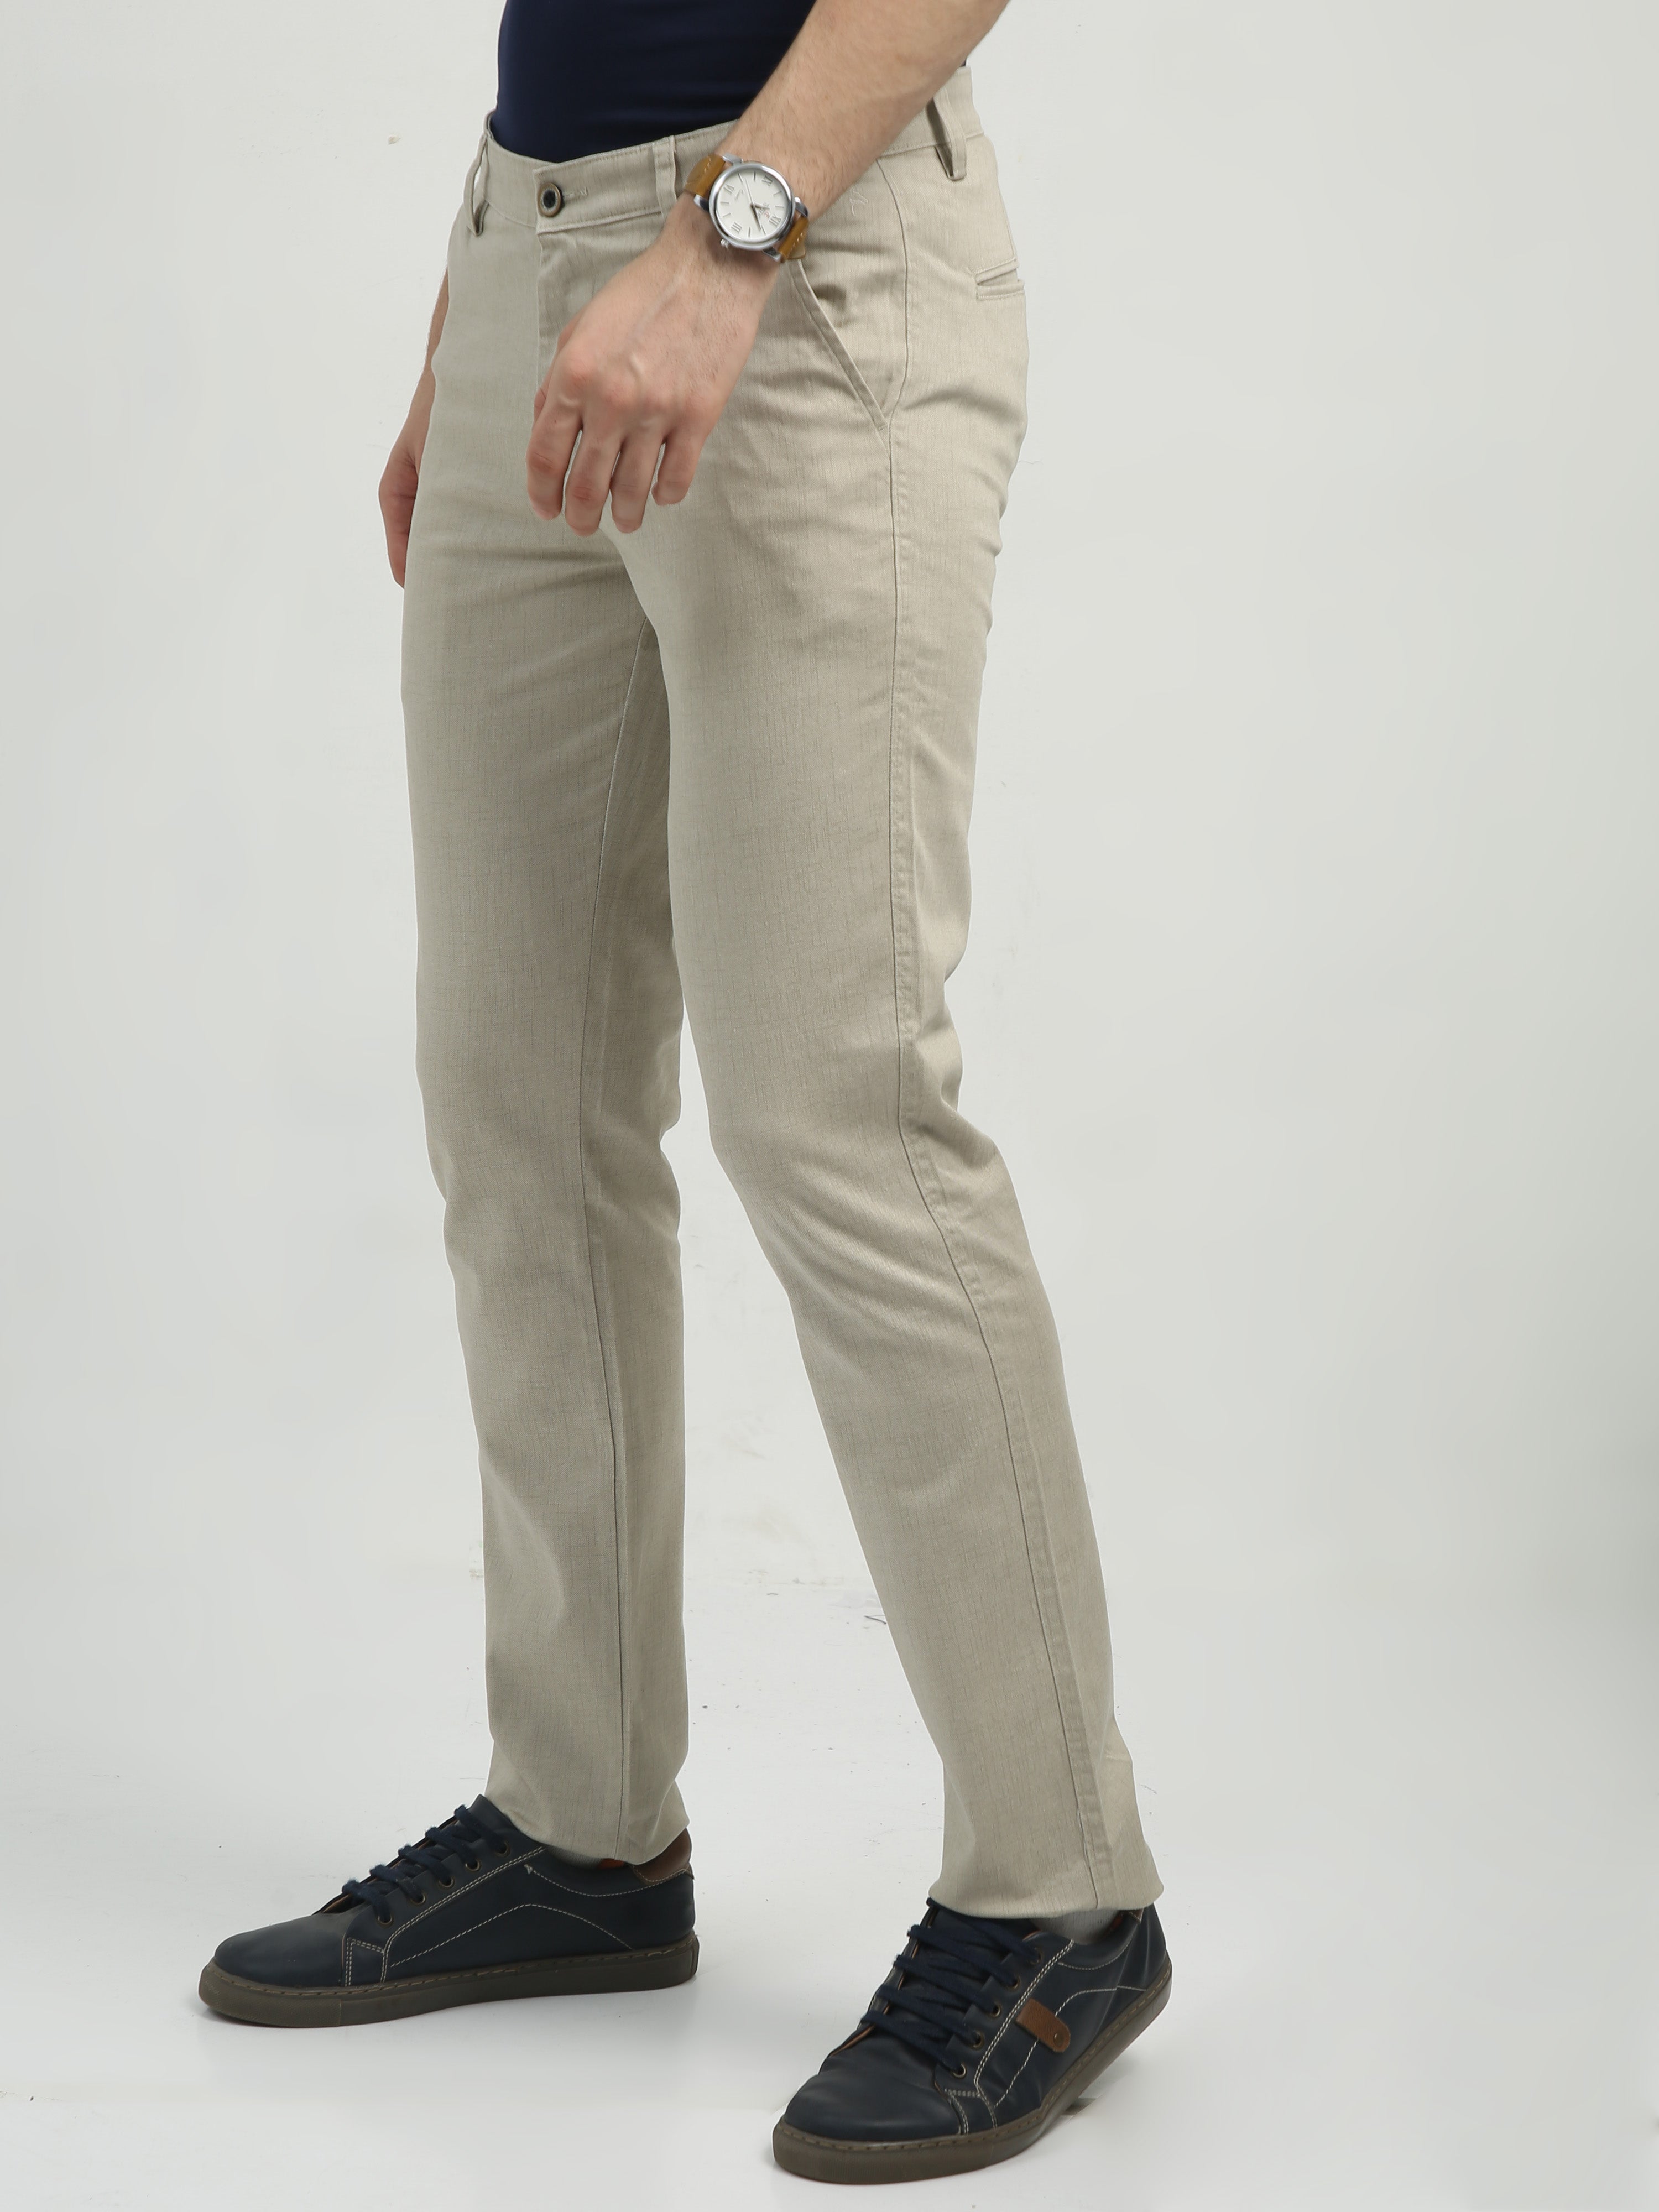 Classic Polo Men's   Chiseled Fit Cotton Trousers | TBO2-30 C-BEG-CF-LY